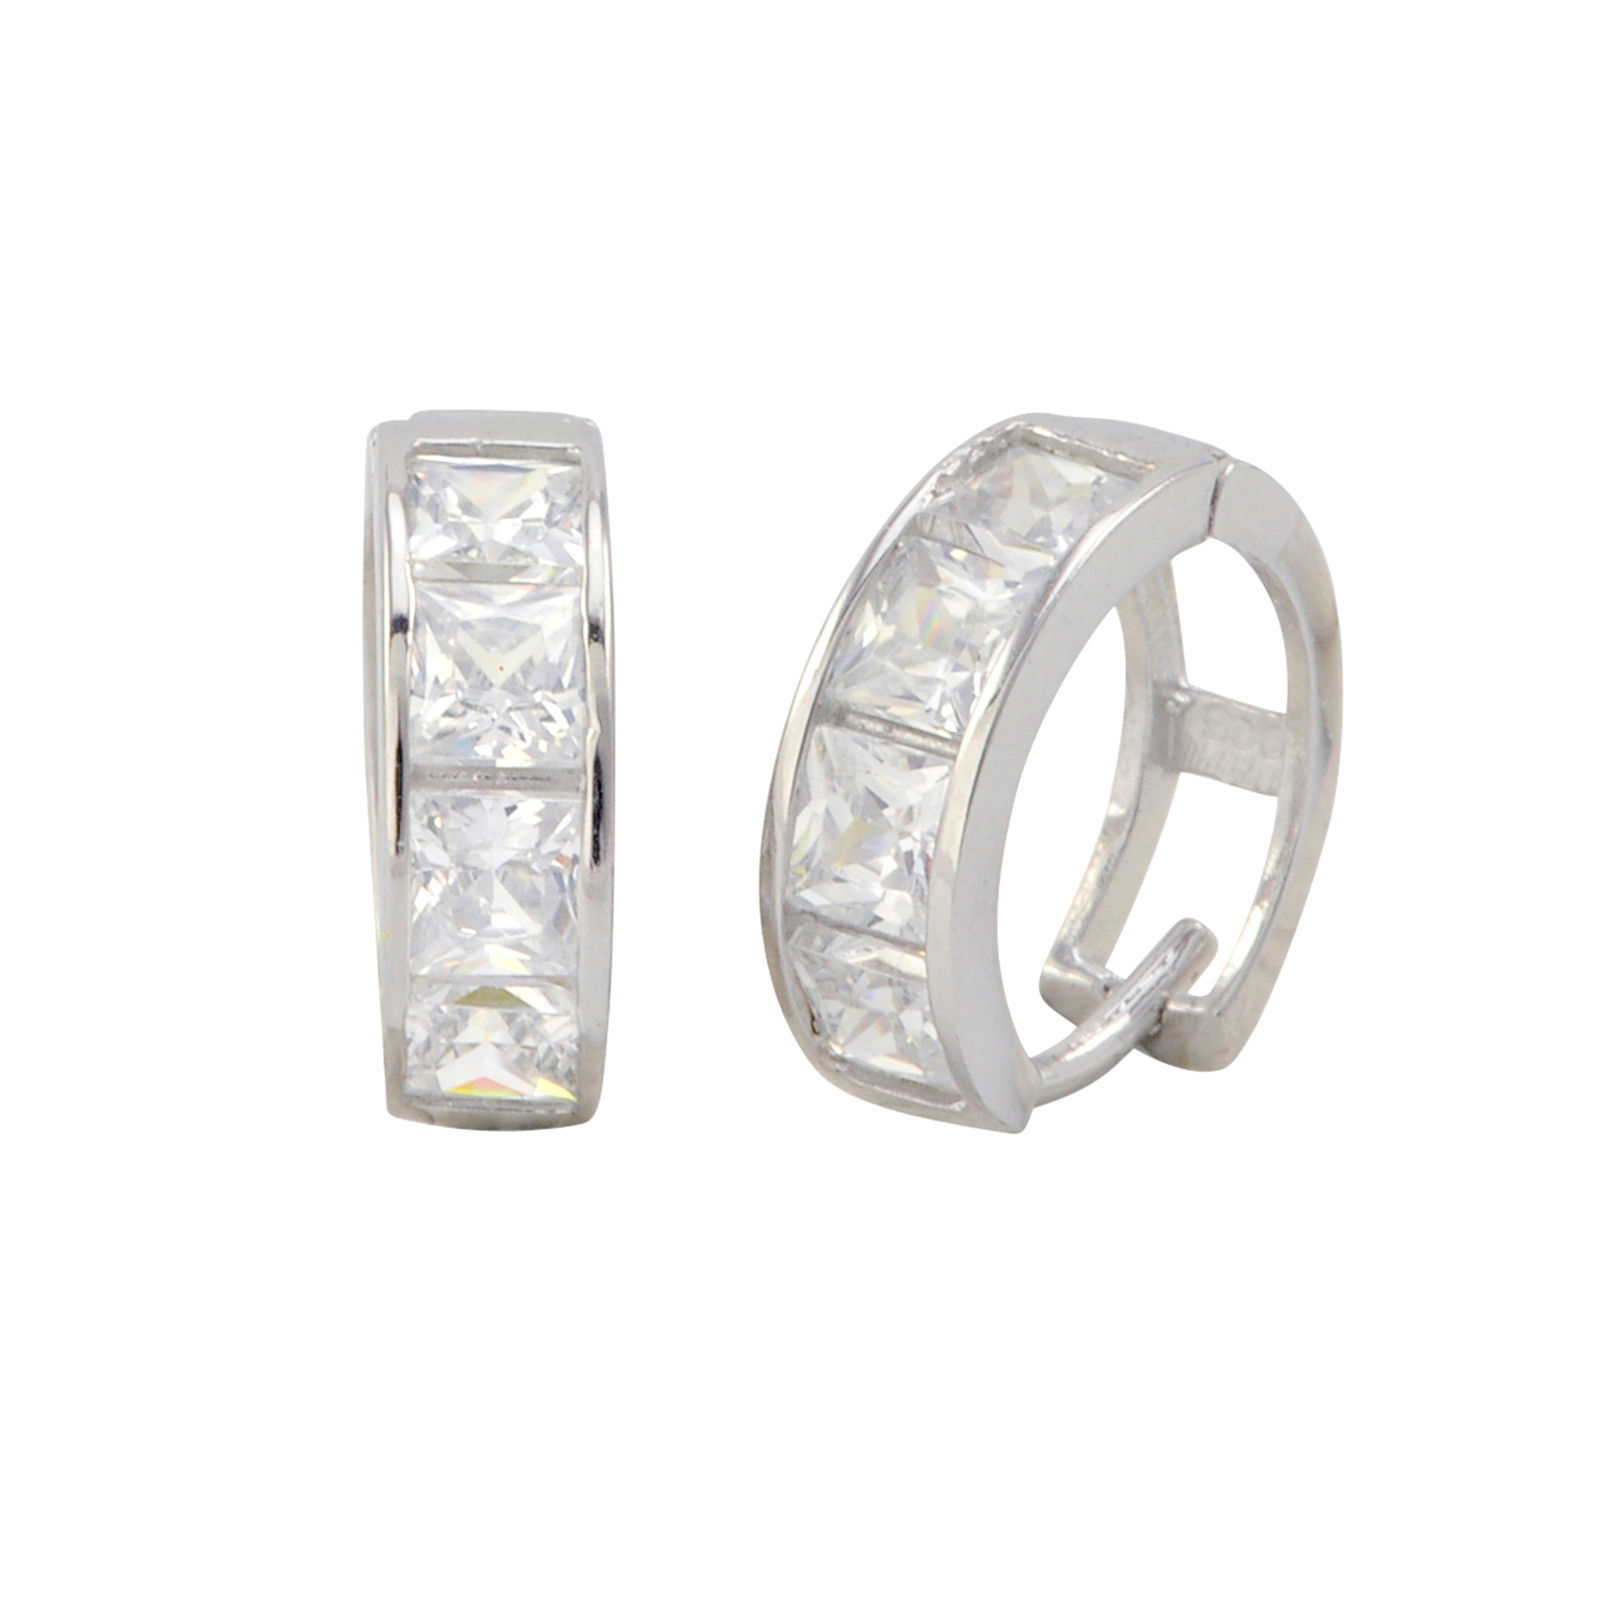 Primary image for Sterling Silver Huggie Earrings Hinged Hoops White Cubic Zirconia 12mm x 4mm